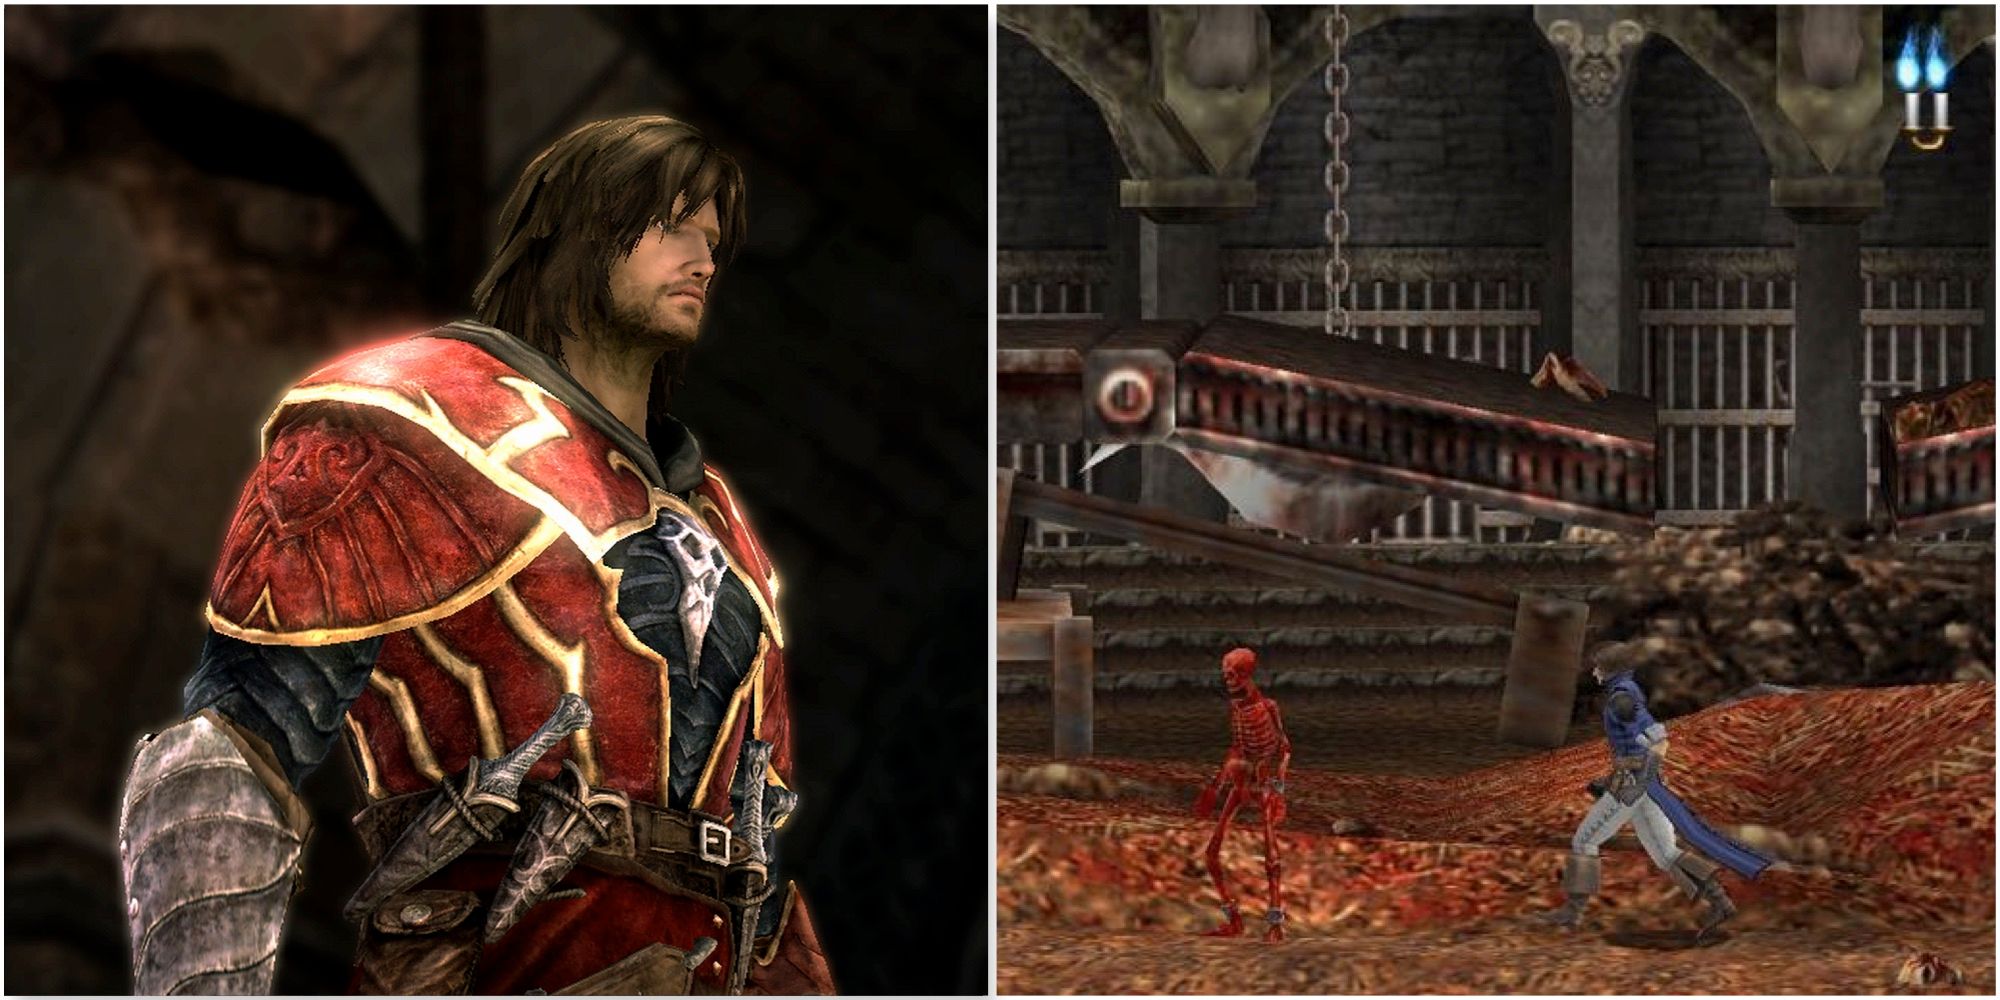 Gabriel in Castlevania Lords Of Shadow and Fighting enemies in Castlevania The Dracula X Chronicles